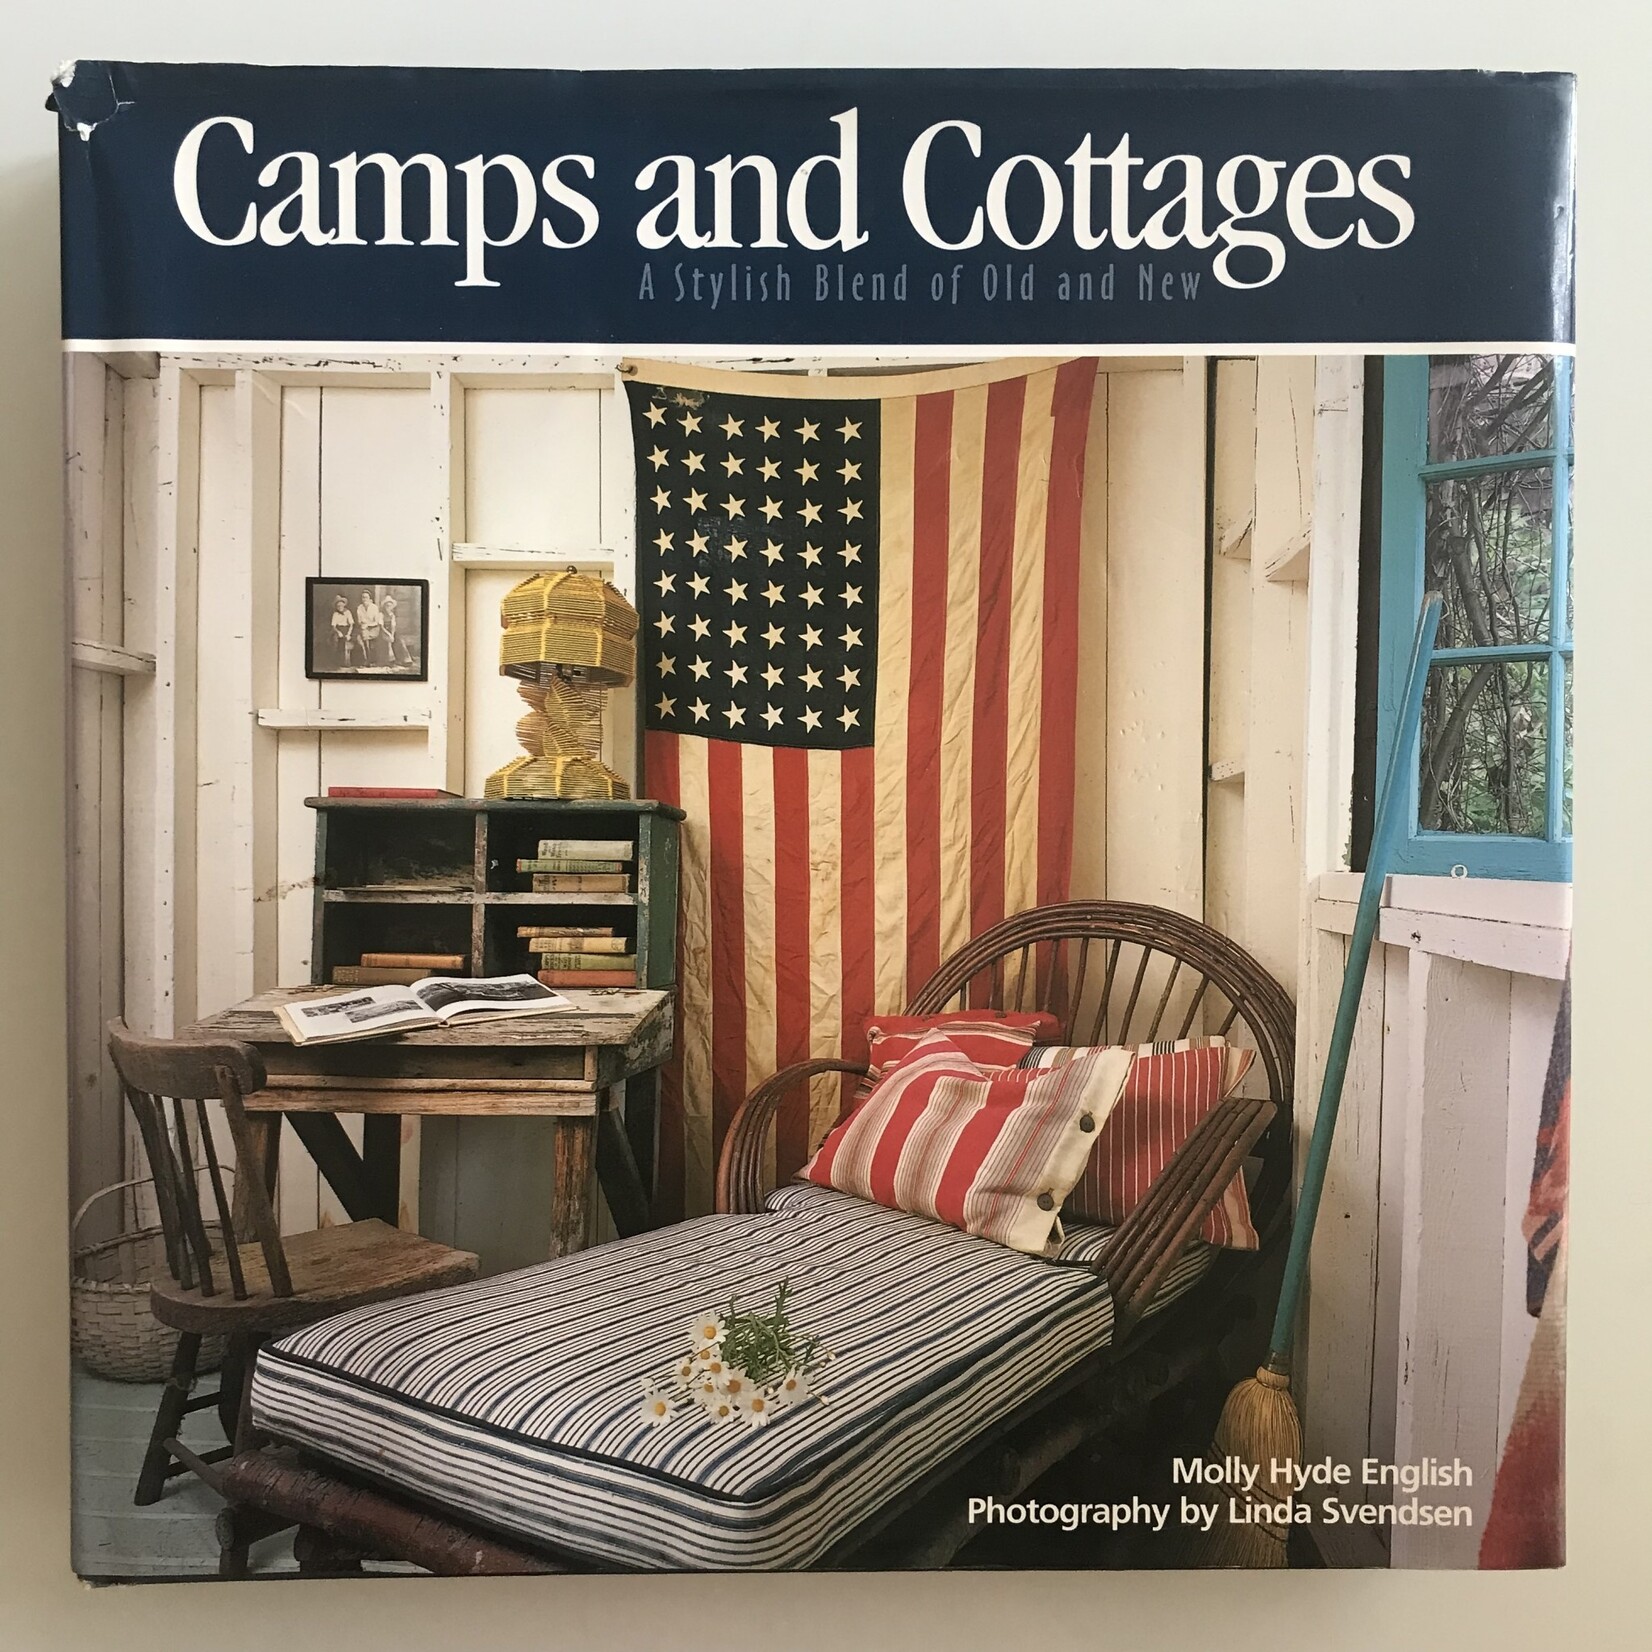 Molly Hyde English, Linda Svendsen - Camps And Cottages: A Stylish Blend Of Old And New - Hardback (USED)